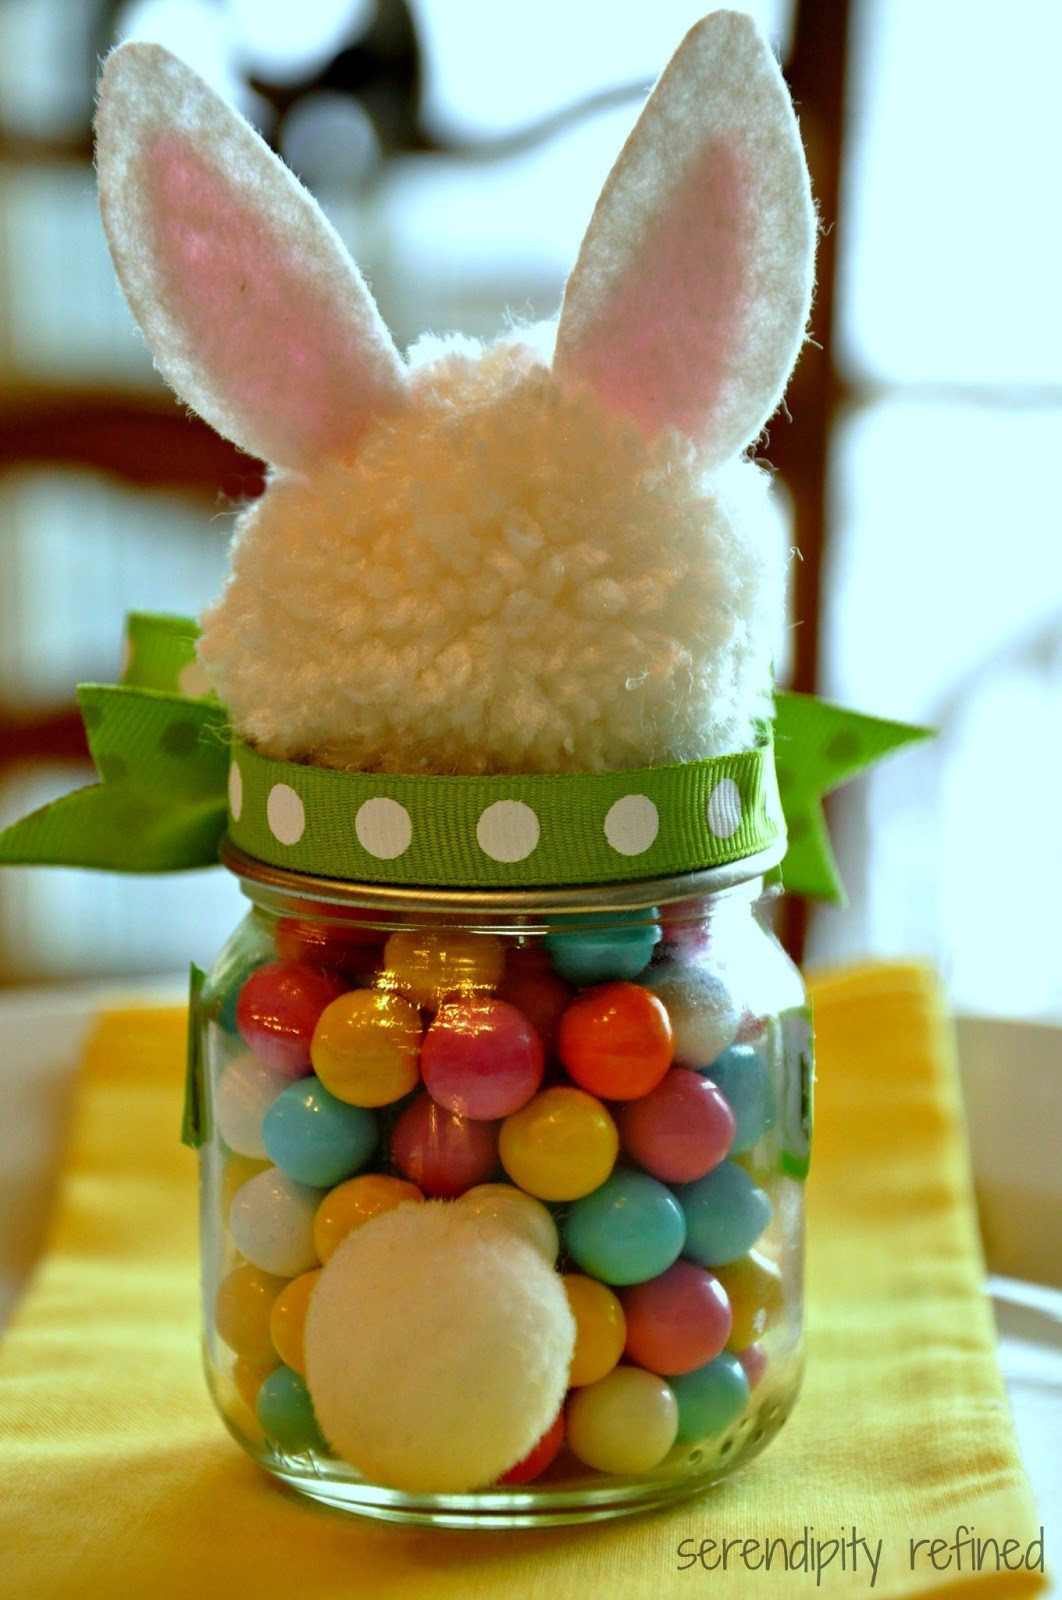 Baby Jar Crafts
 Serendipity Refined Blog Upcycled Baby Food Jar Easter